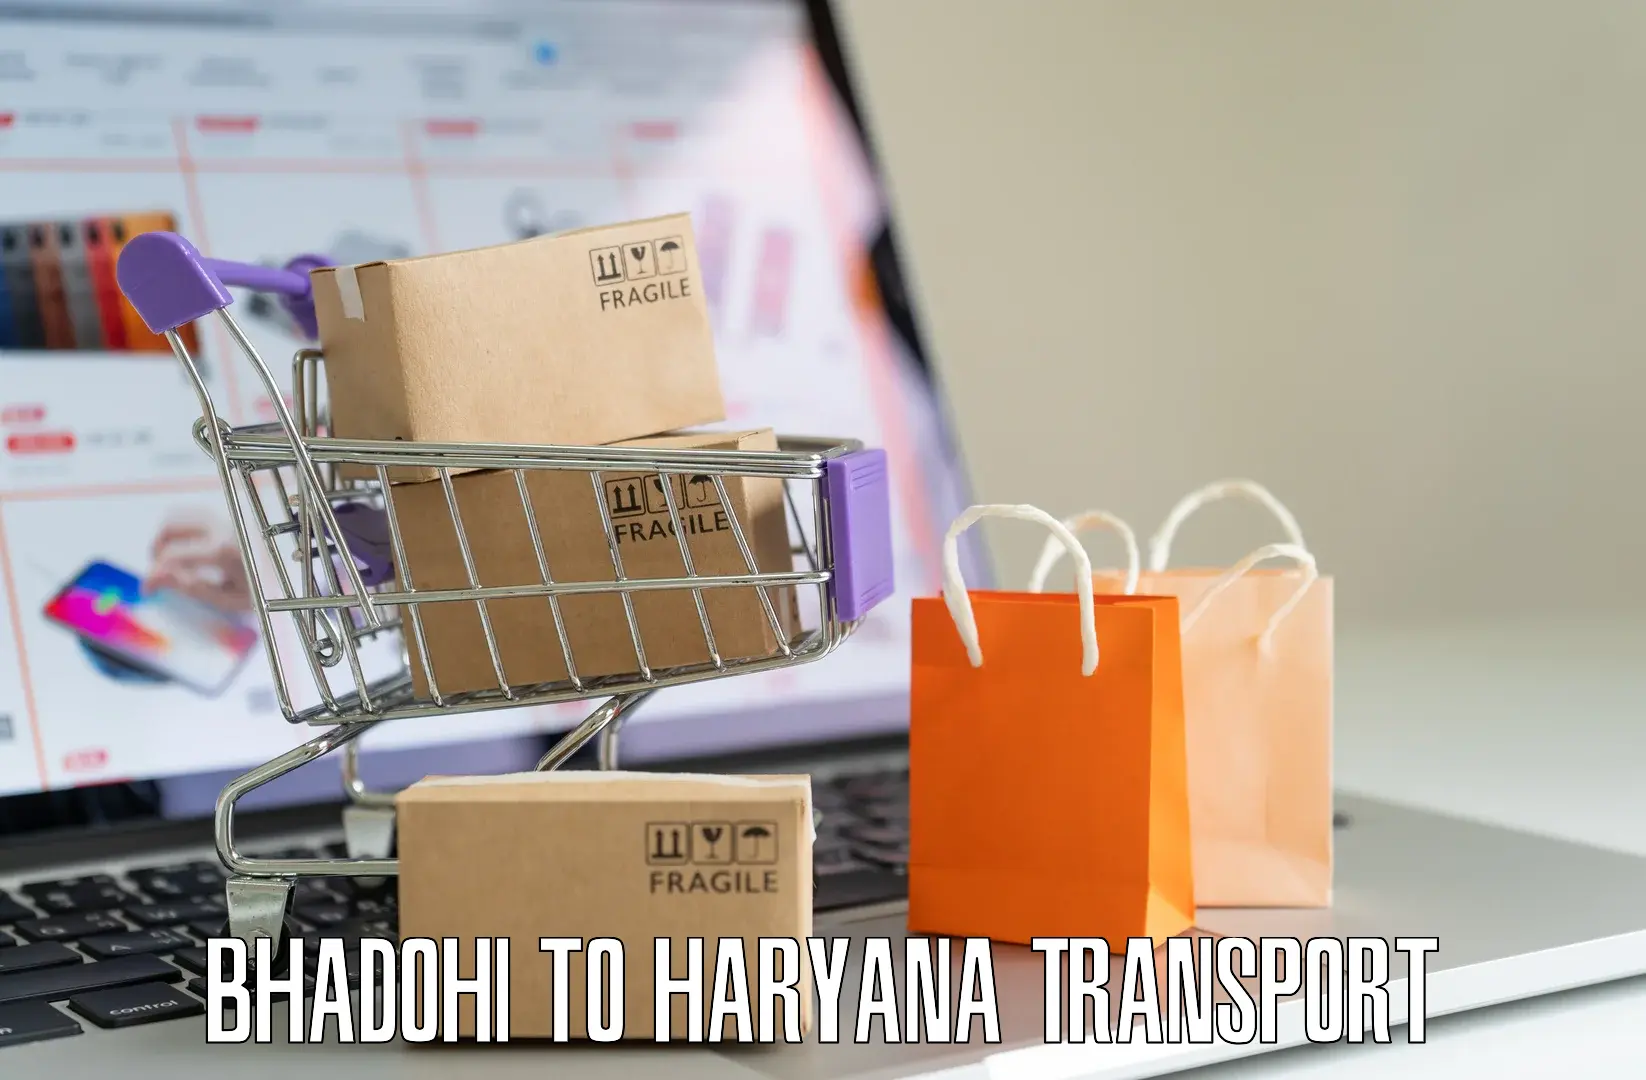 Transport bike from one state to another Bhadohi to Haryana